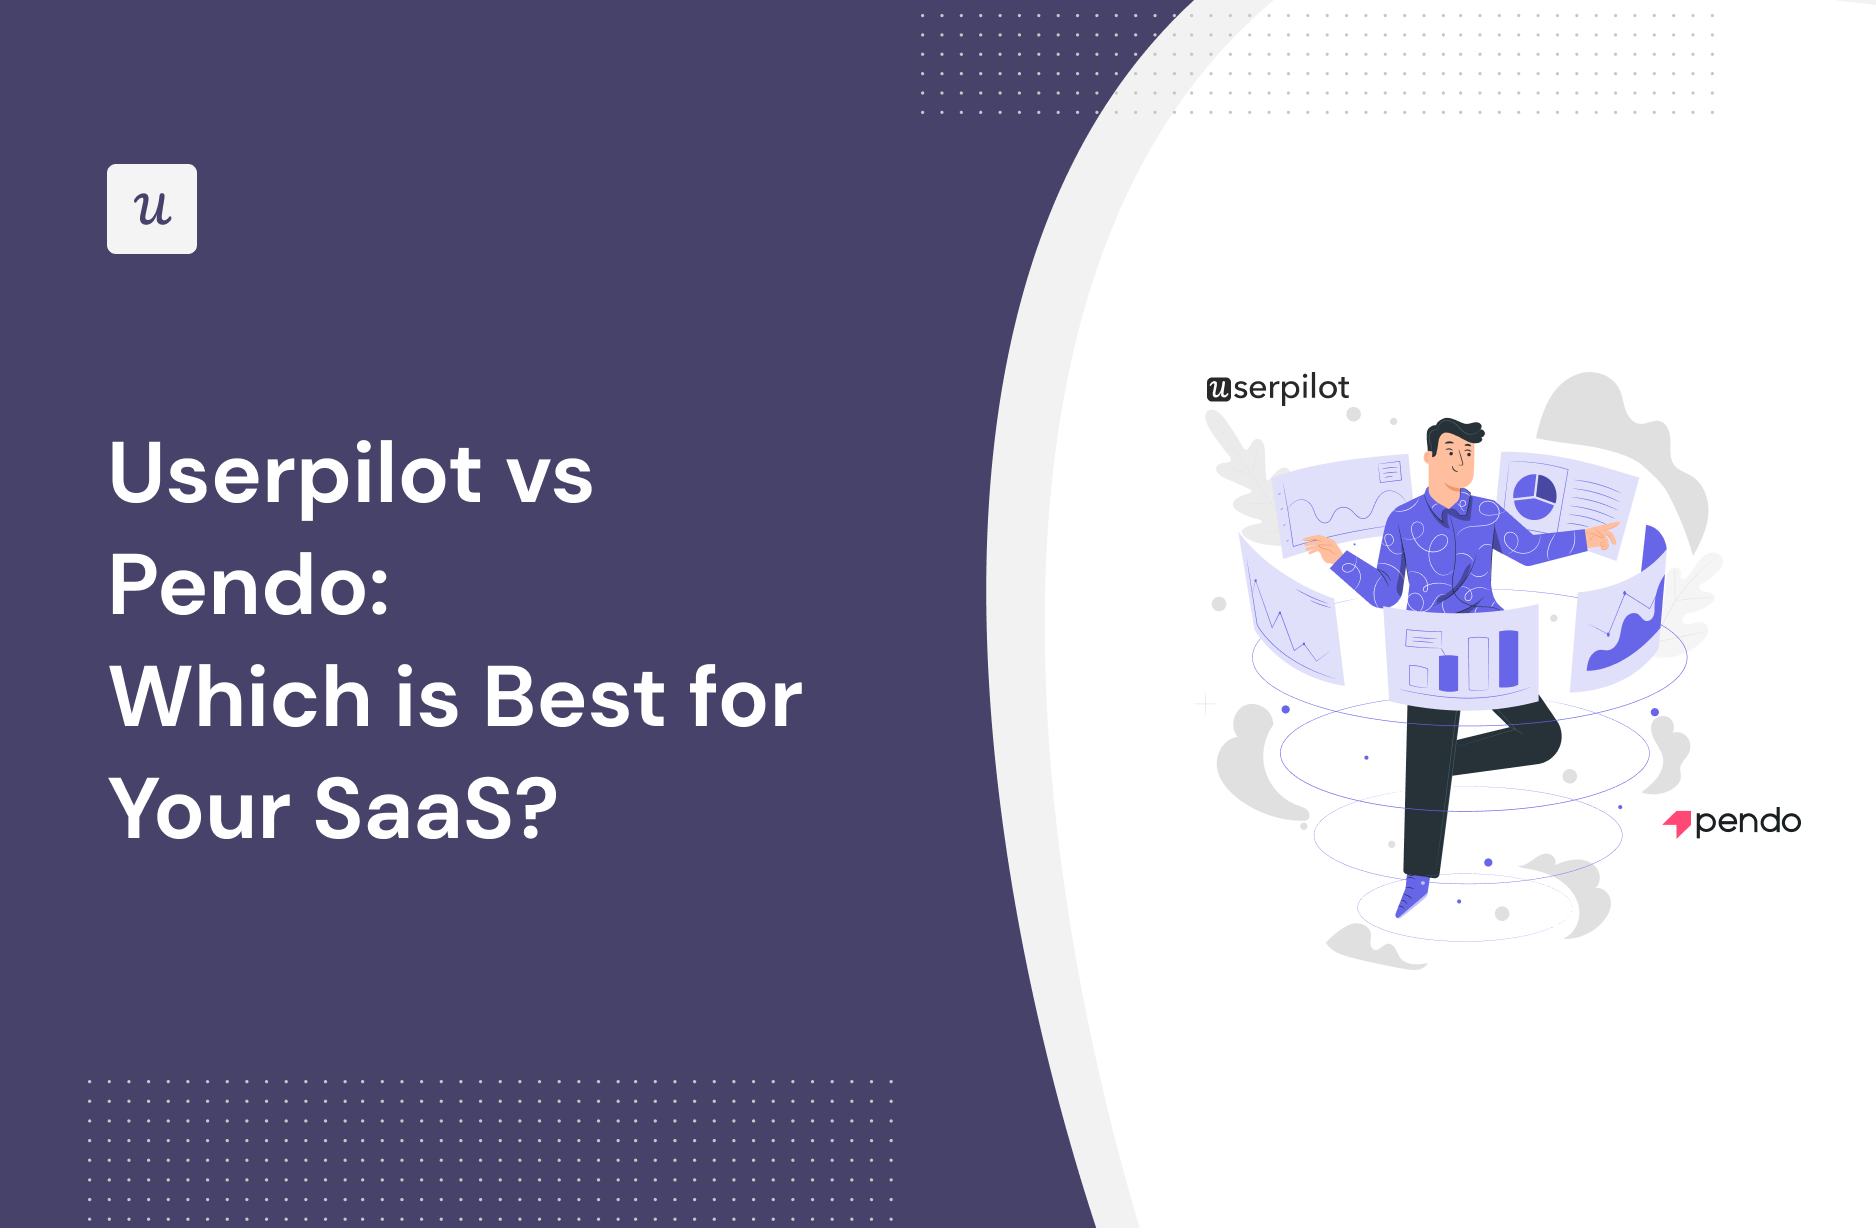 Userpilot vs Pendo: Which is Best for Your SaaS?